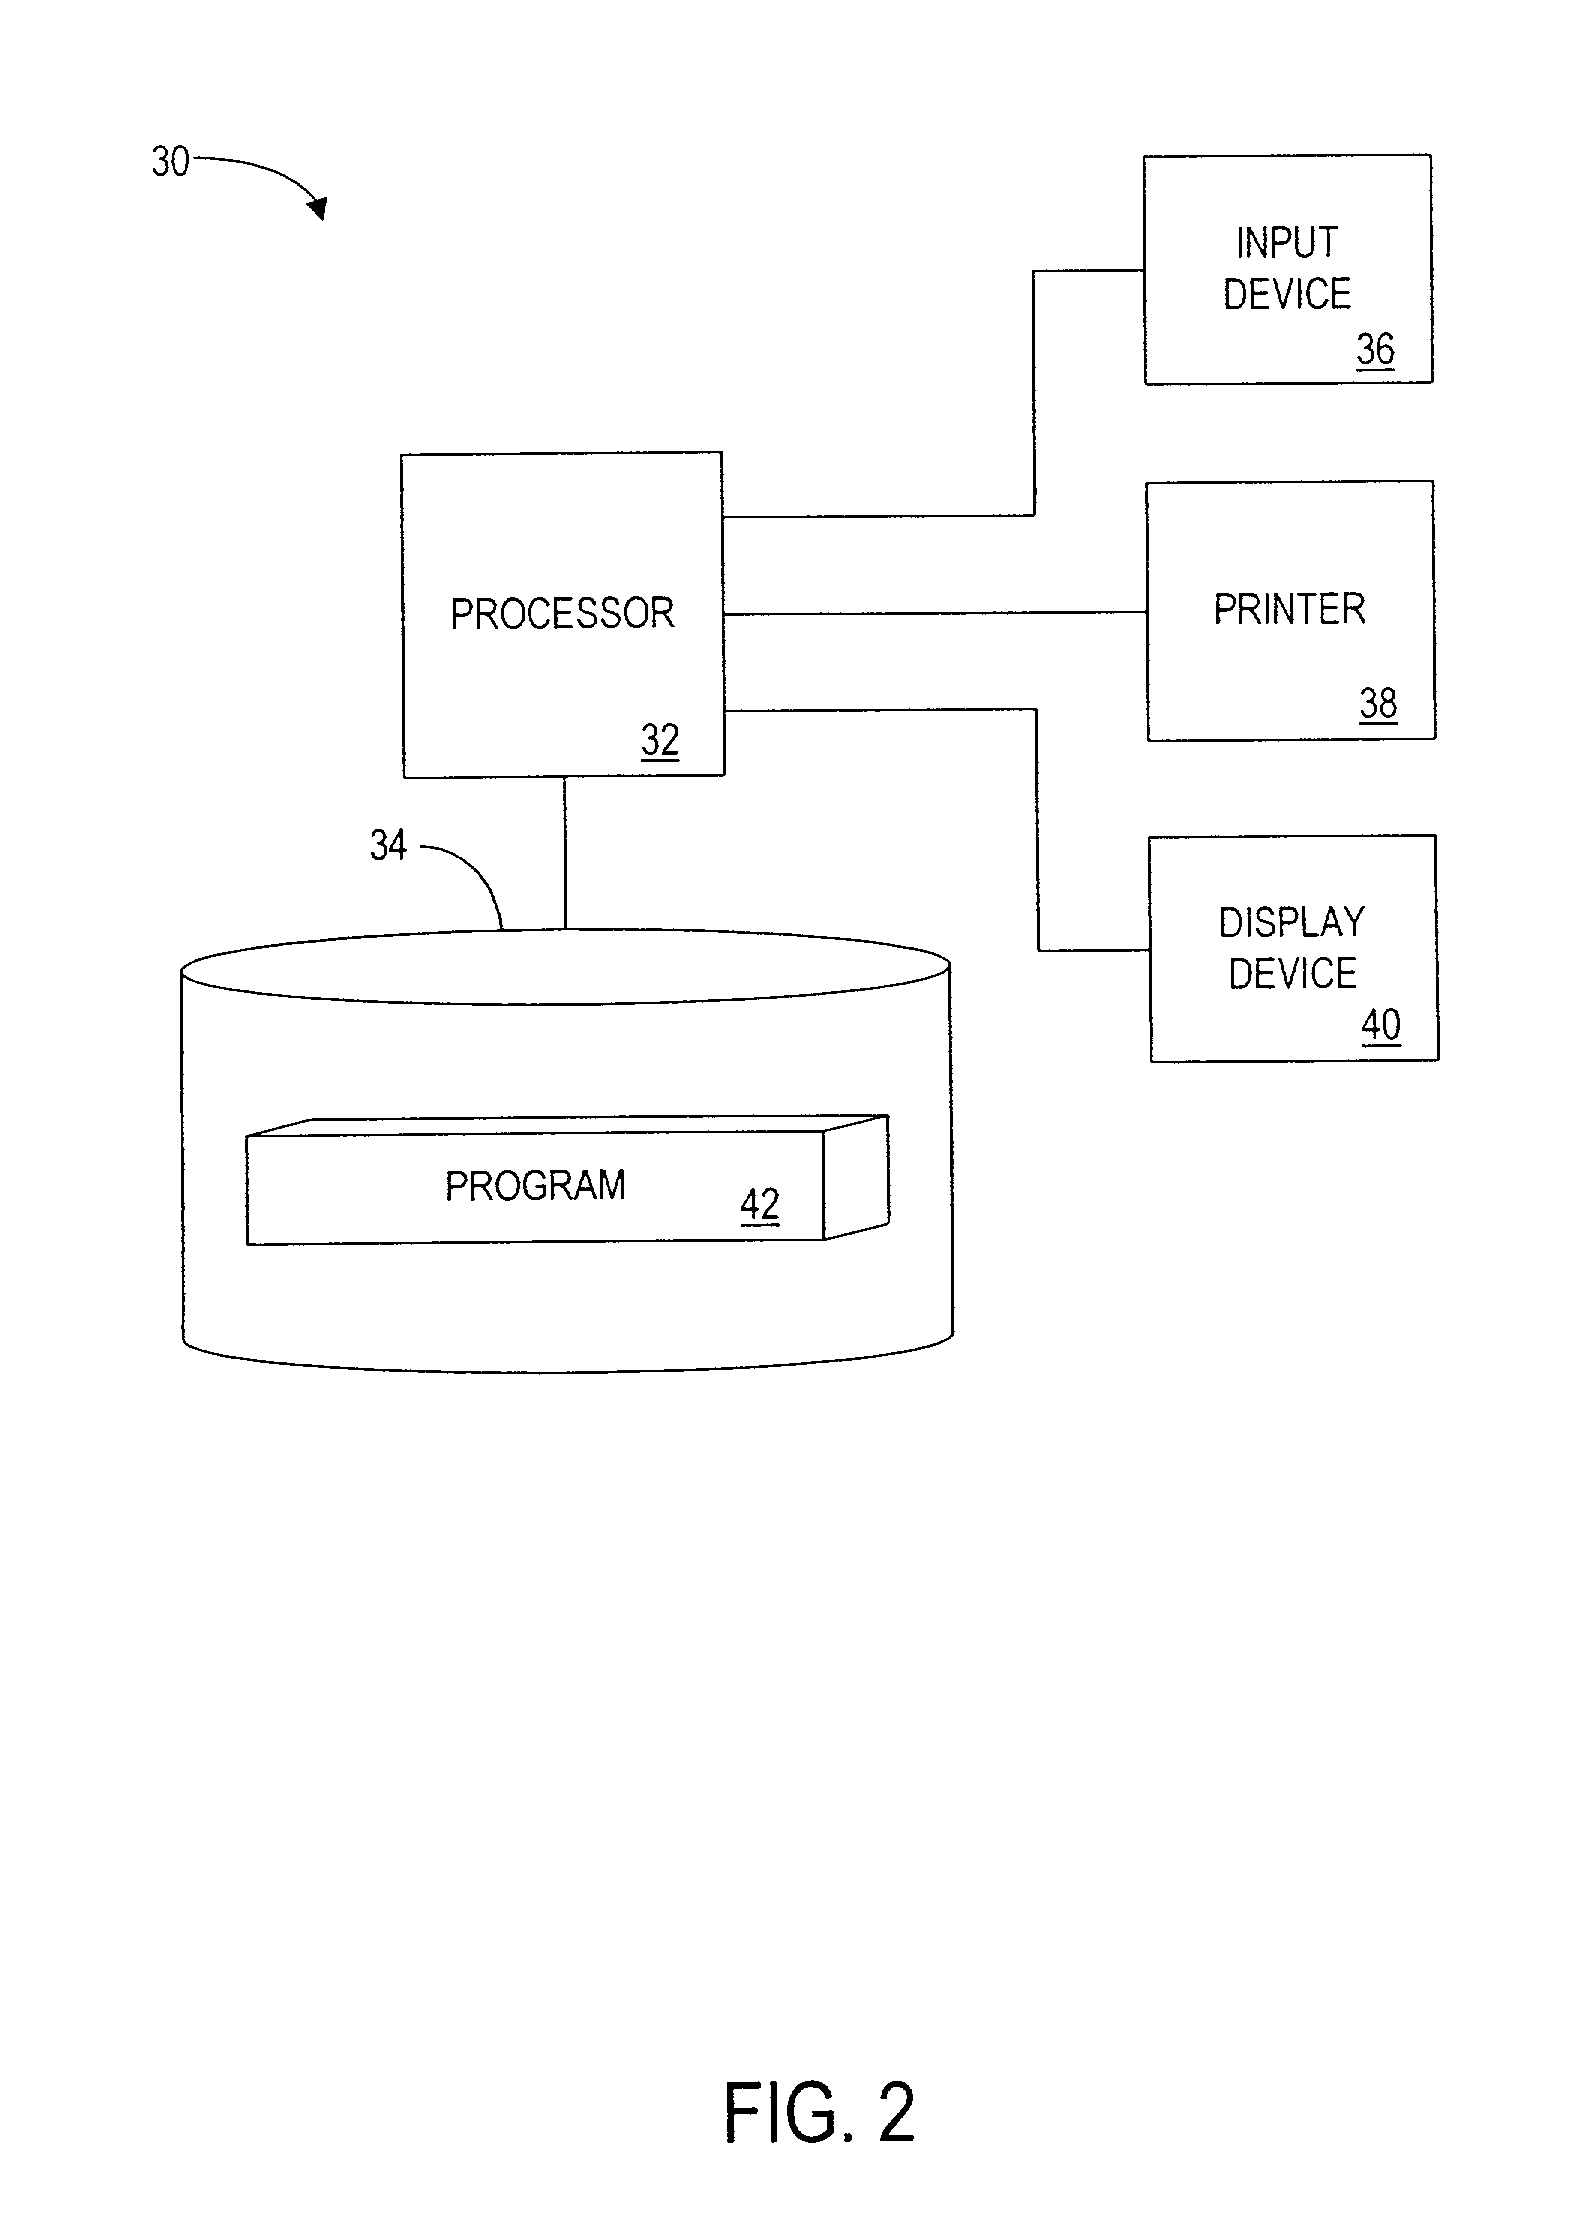 Method and apparatus for selling an aging food product